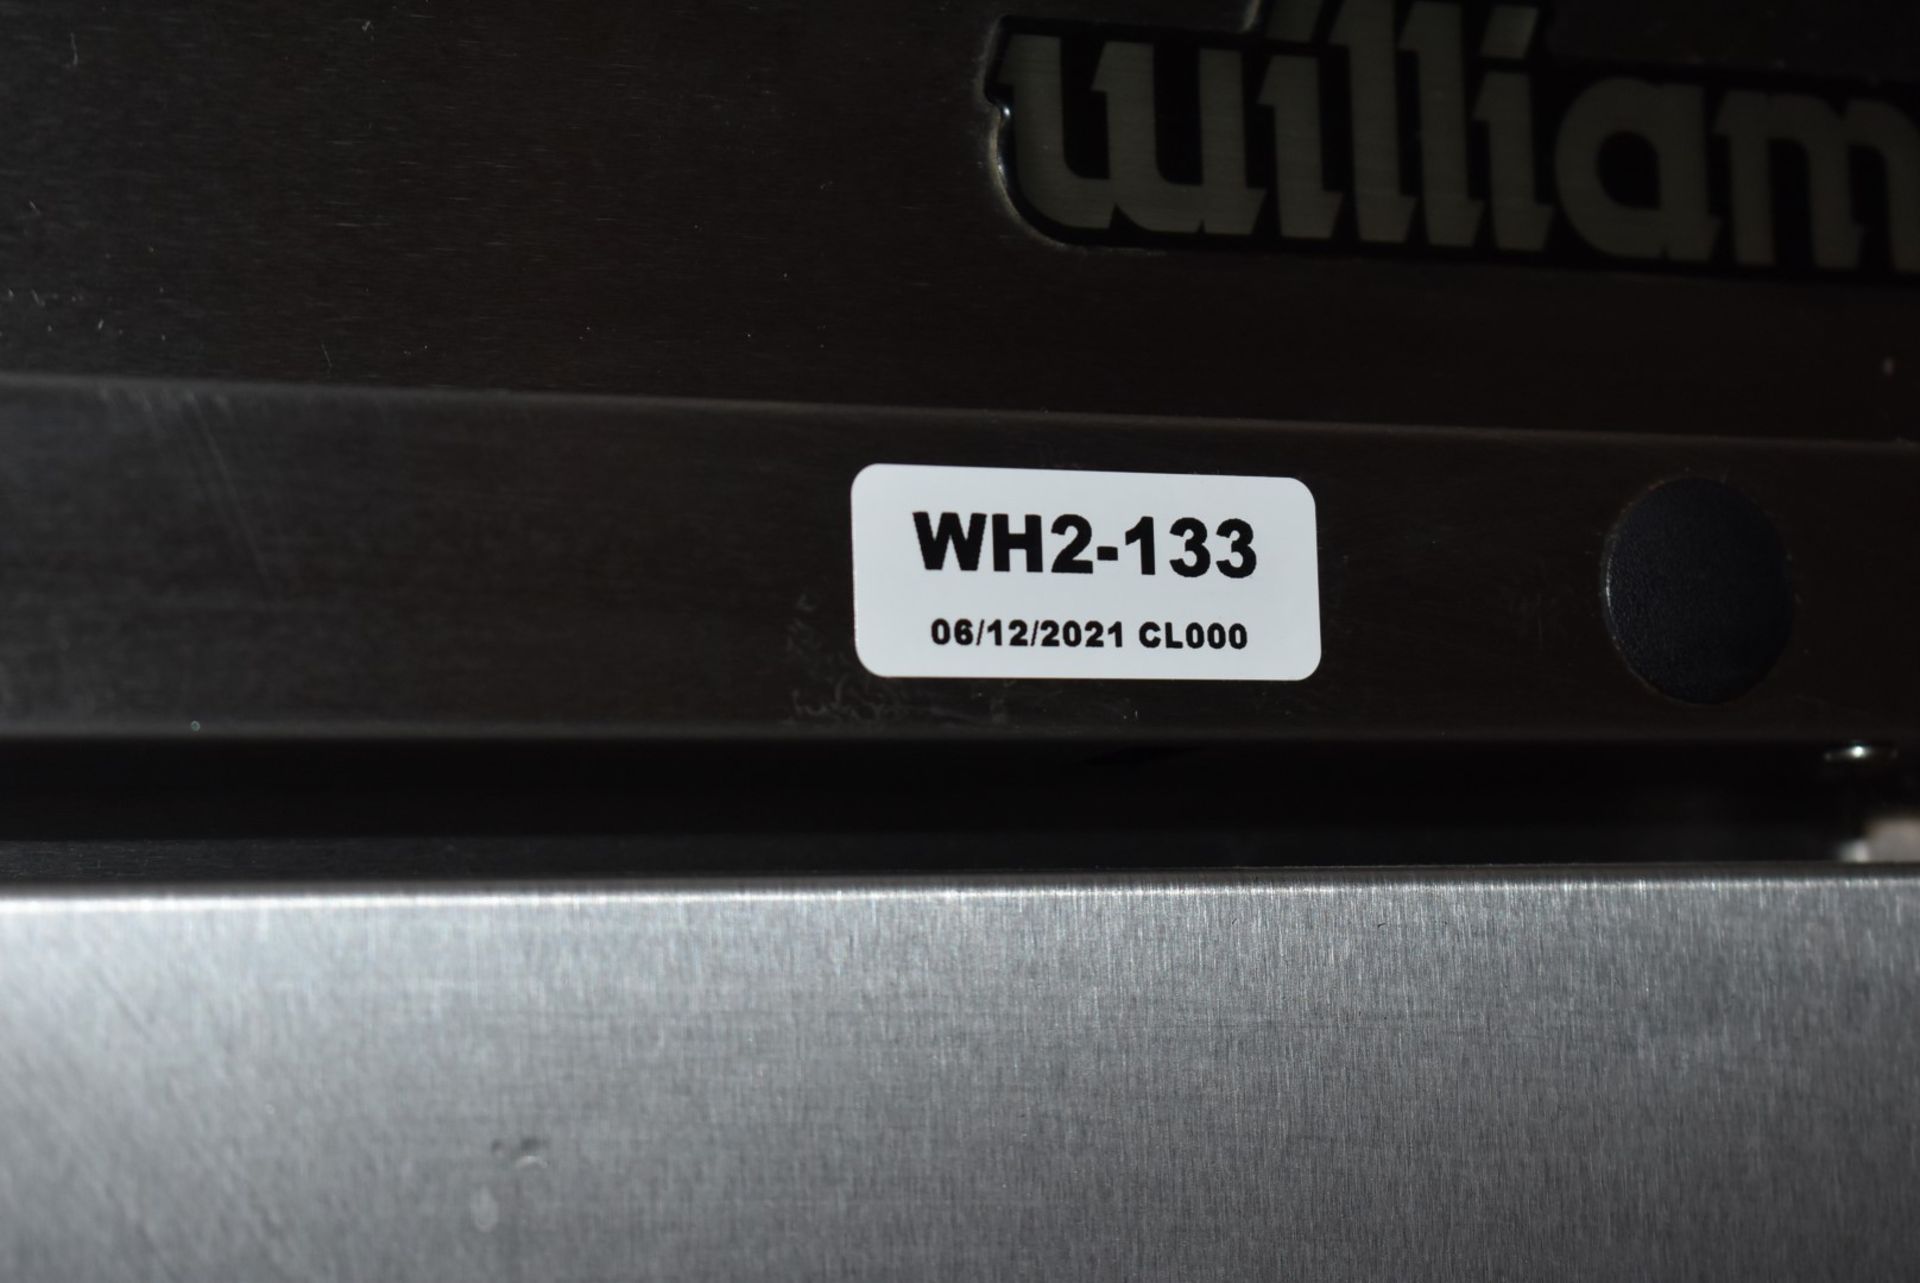 1 x Williams Upright Single Door Refrigerator With Stainless Steel Exterior - Model HJ1SA - Recently - Image 8 of 11